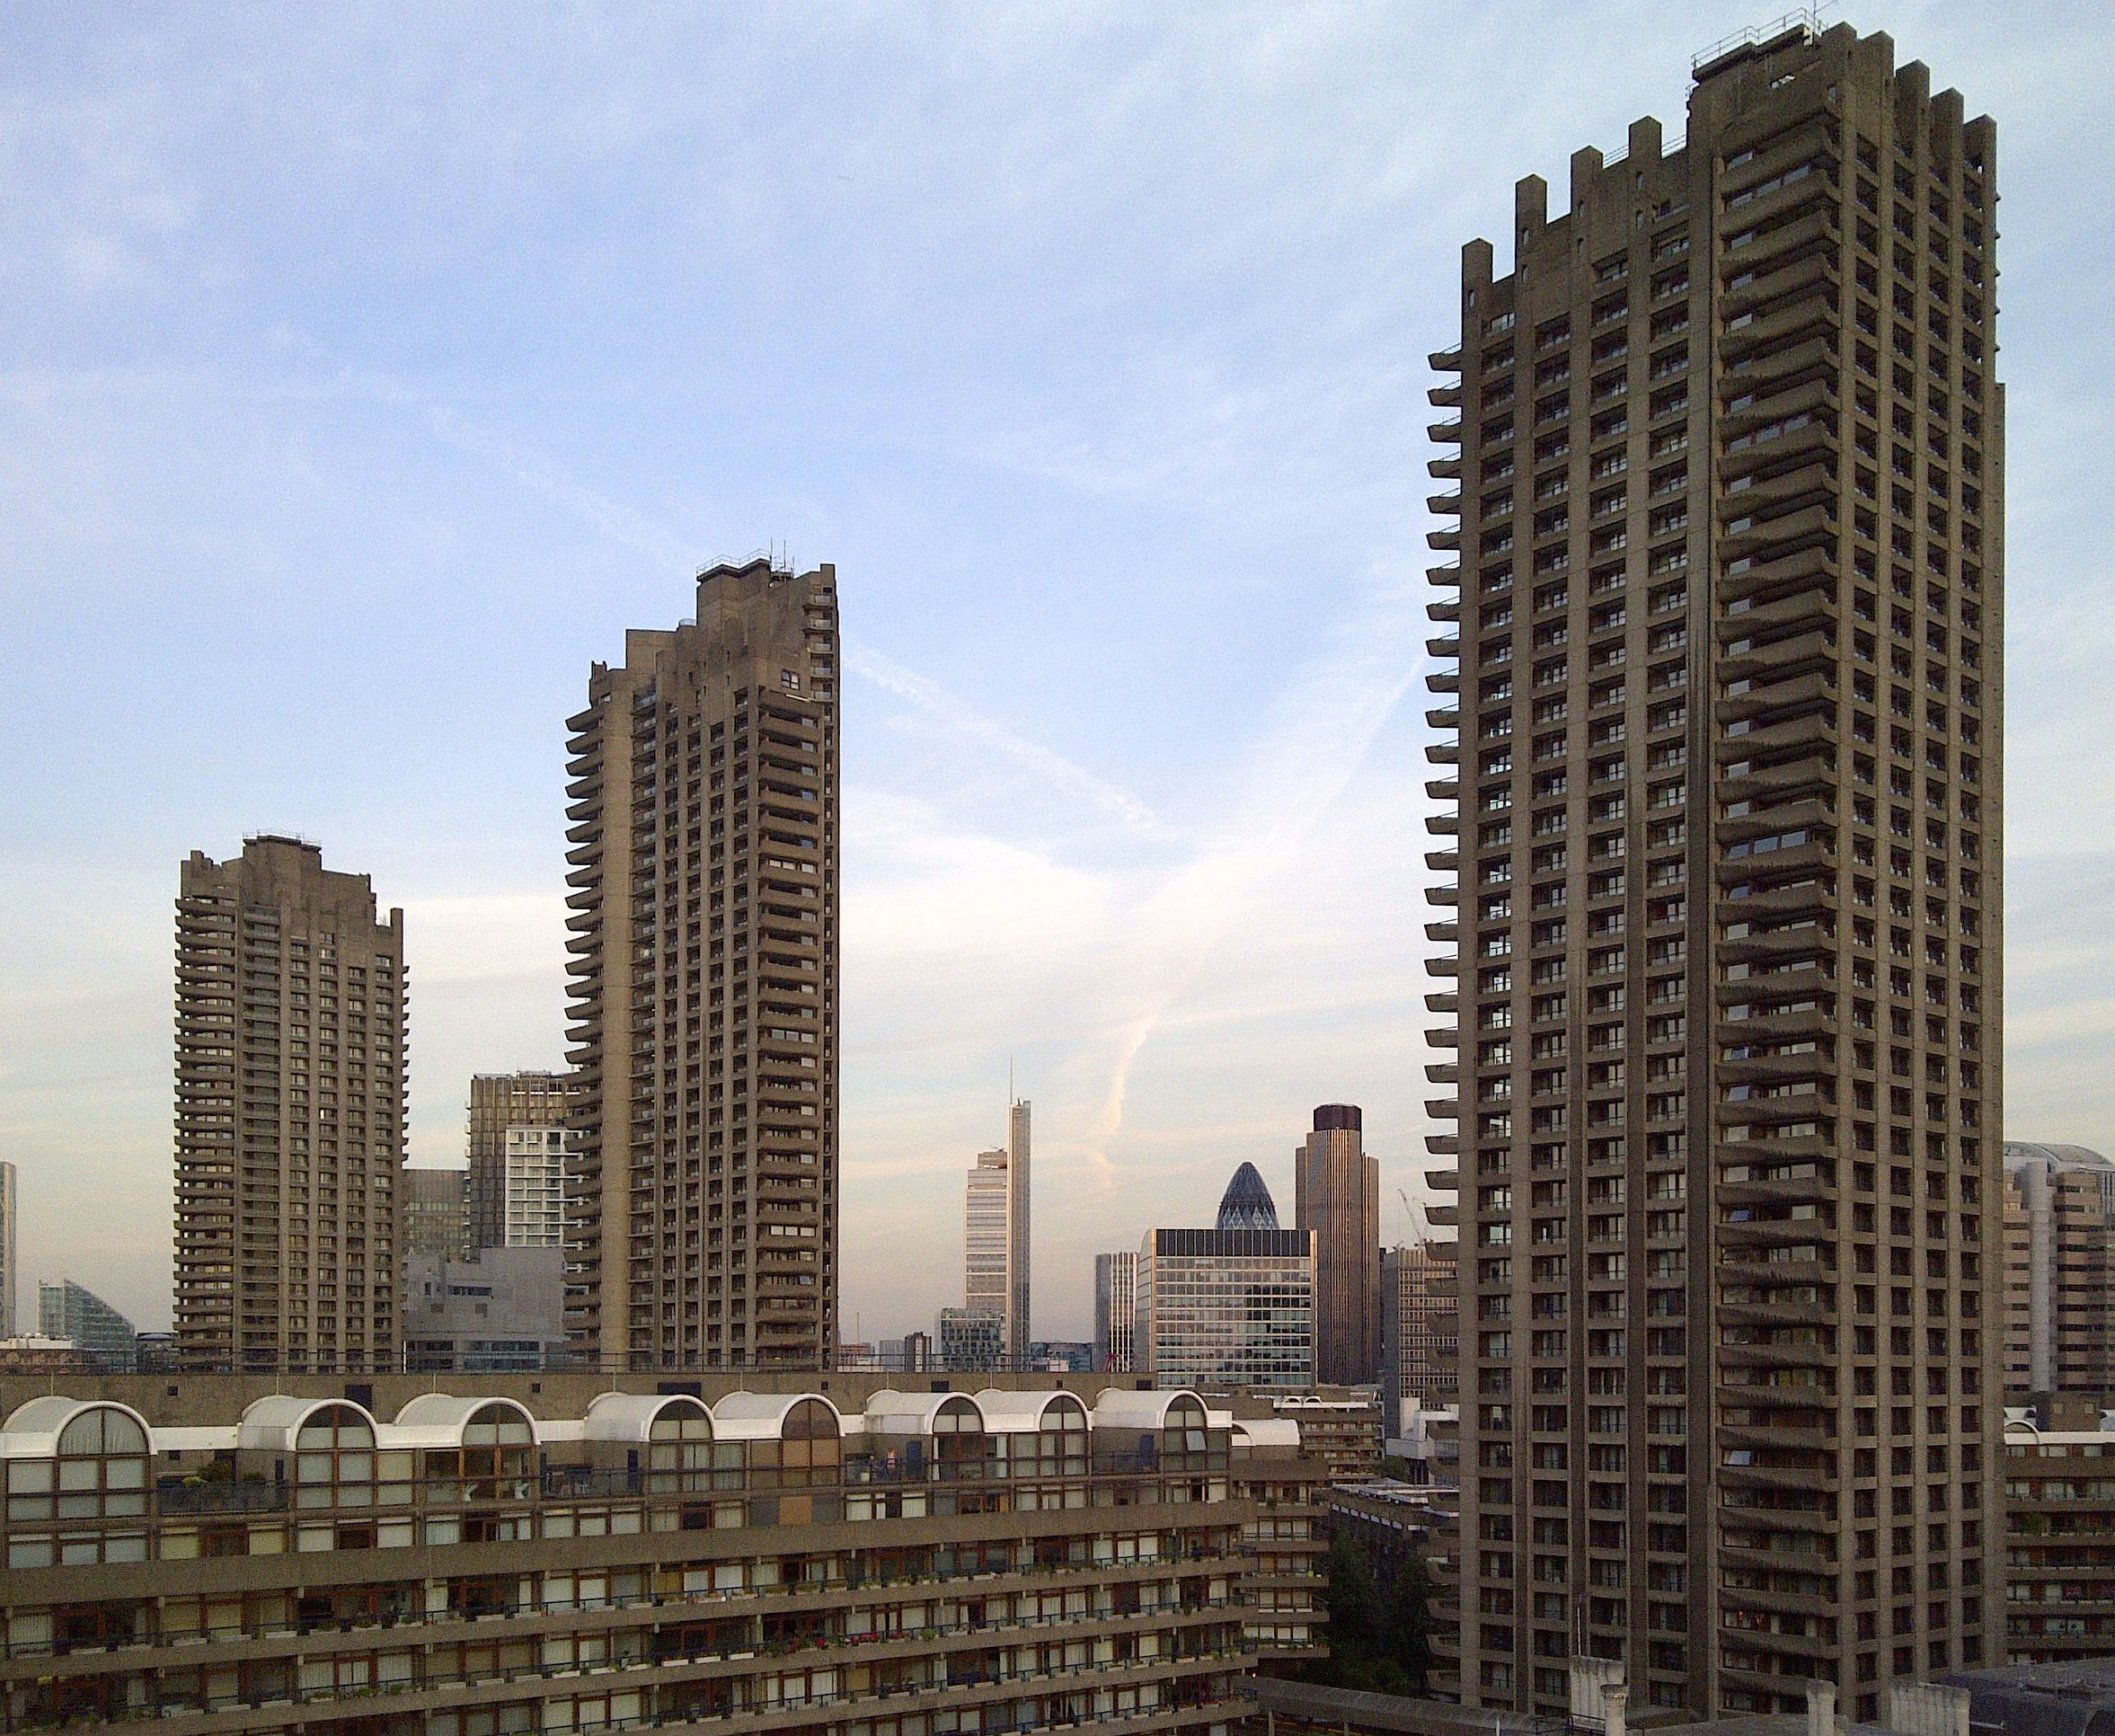 Barbican Estate Check out the most beautiful skyscrapers in London